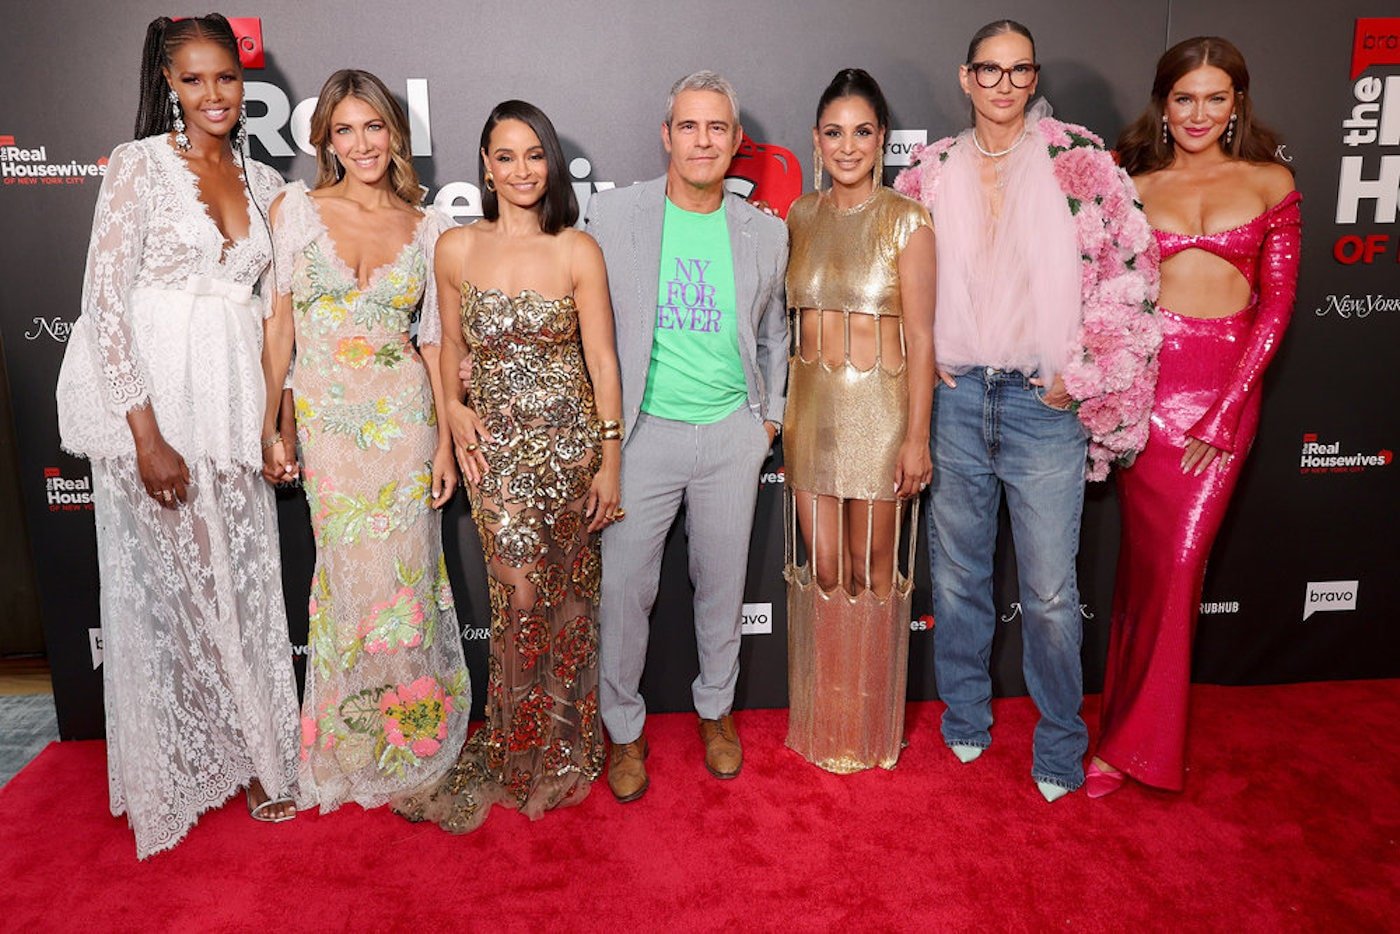 Andy Cohen and new 'RHONY' cast